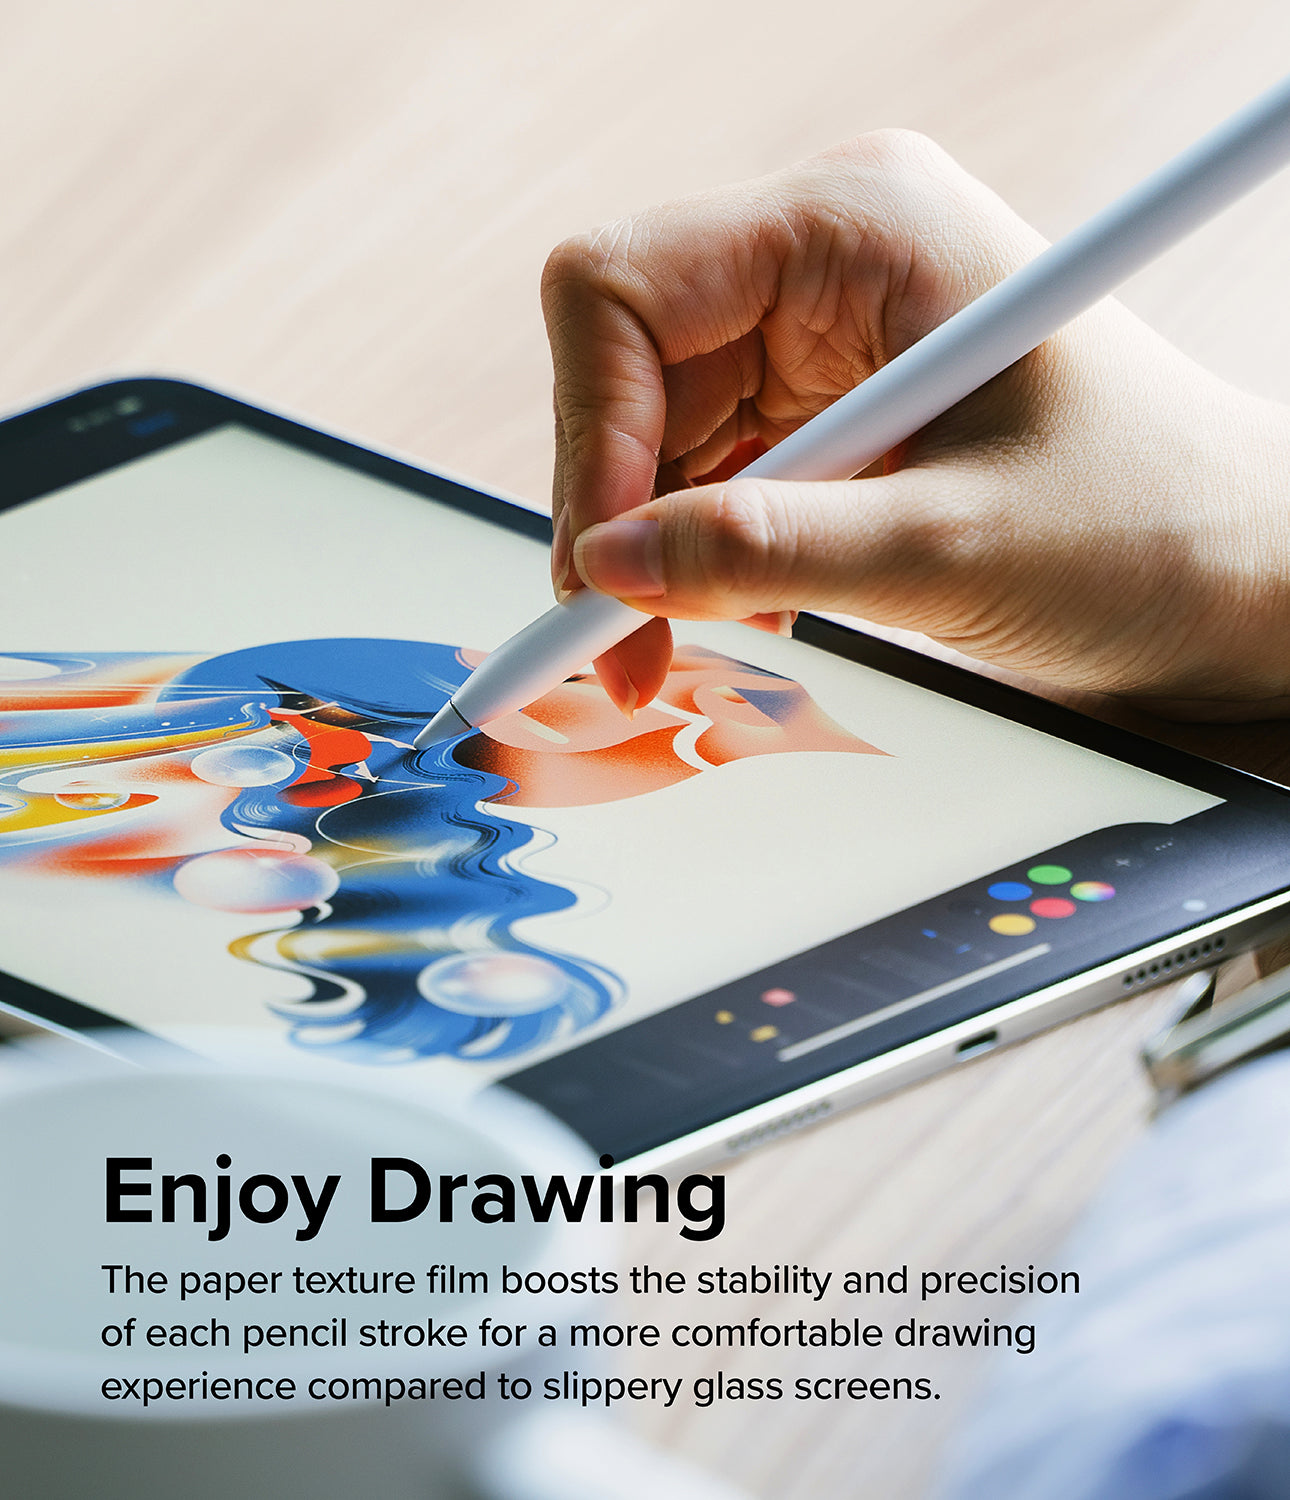 iPad Pro 11" (M4) Screen Protector | Paper Touch Film - Enjoy Drawing. The paper texture film boosts the stability and precision of each pencil stroke for a more comfortable drawing experience compared to slippery glass screens.